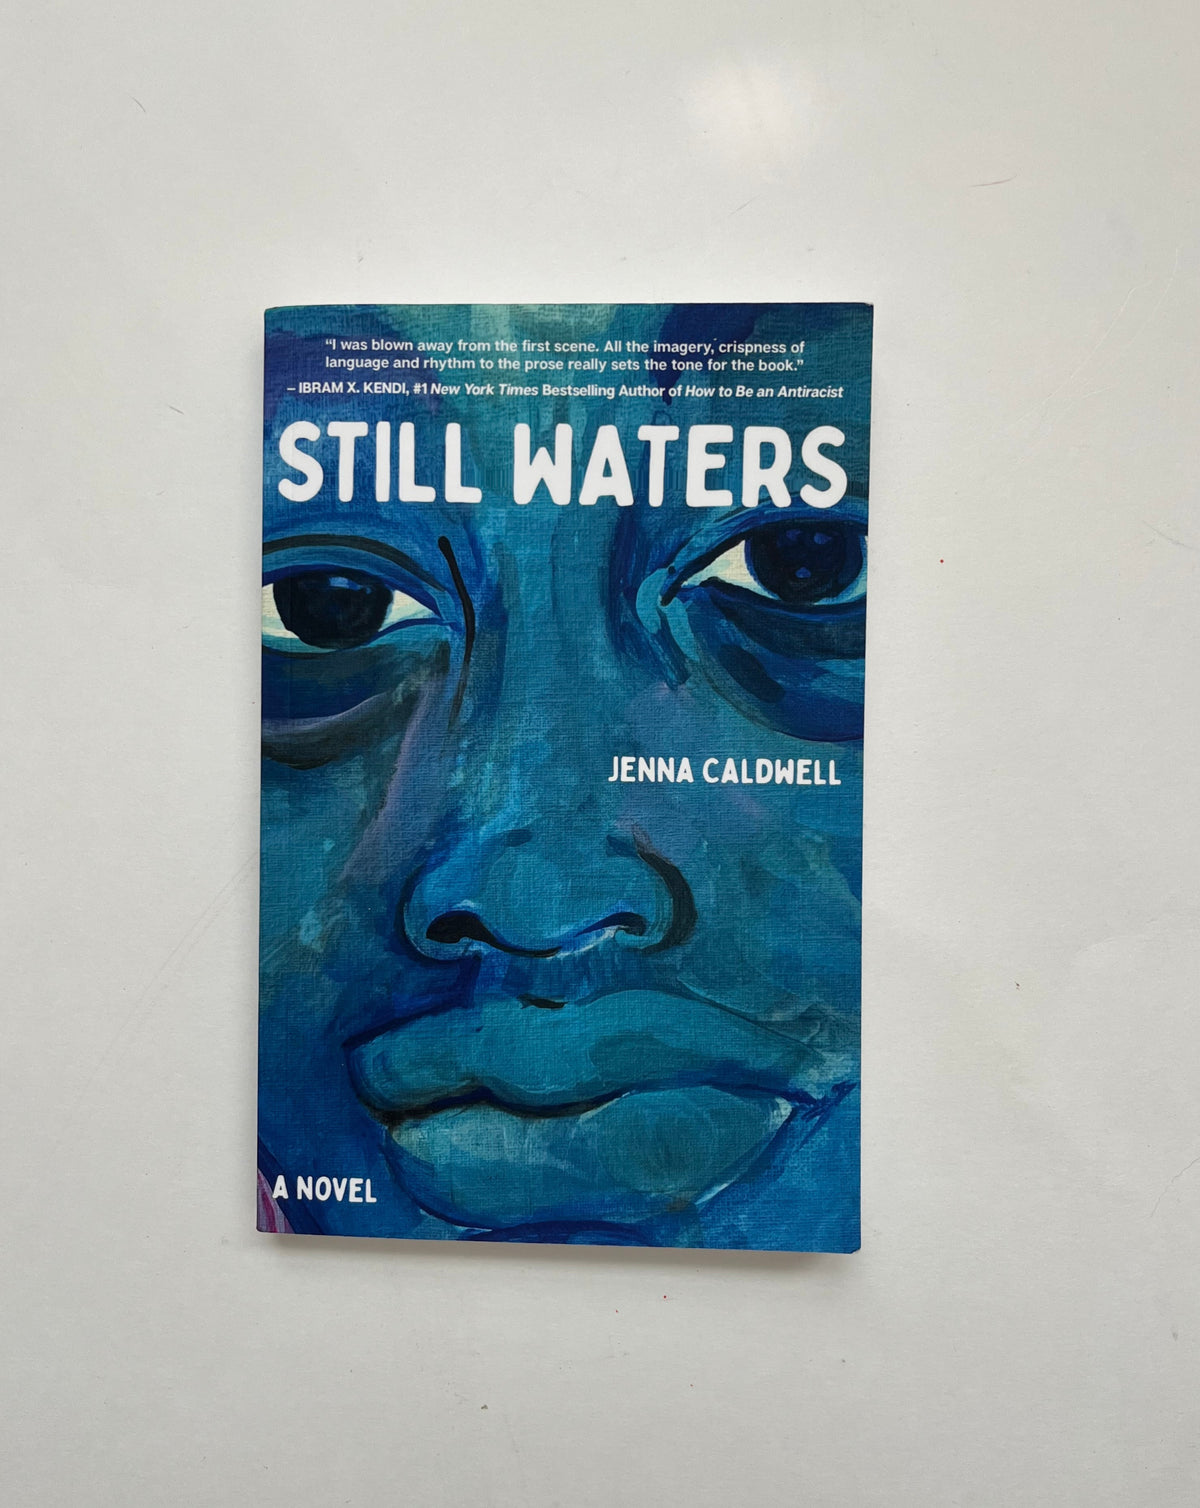 Still Waters by Jenna Caldwell